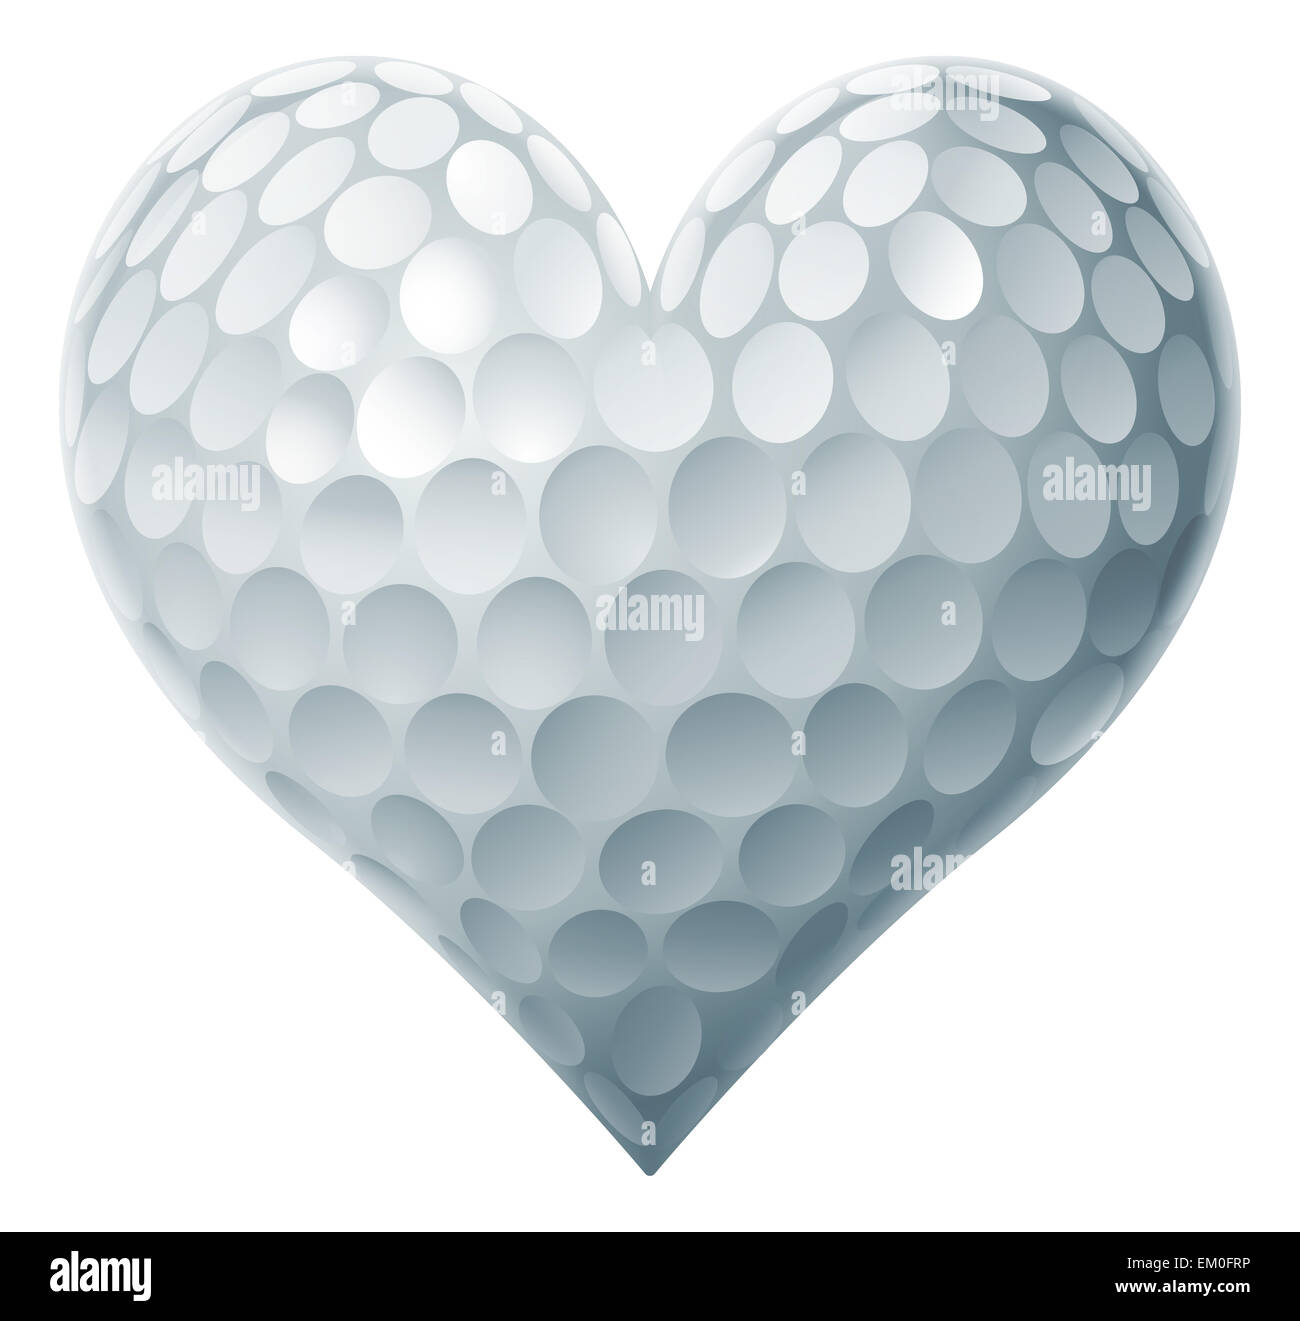 Golf Ball Heart concept of a heart shaped golf ball symbolising the love of golf. Stock Photo